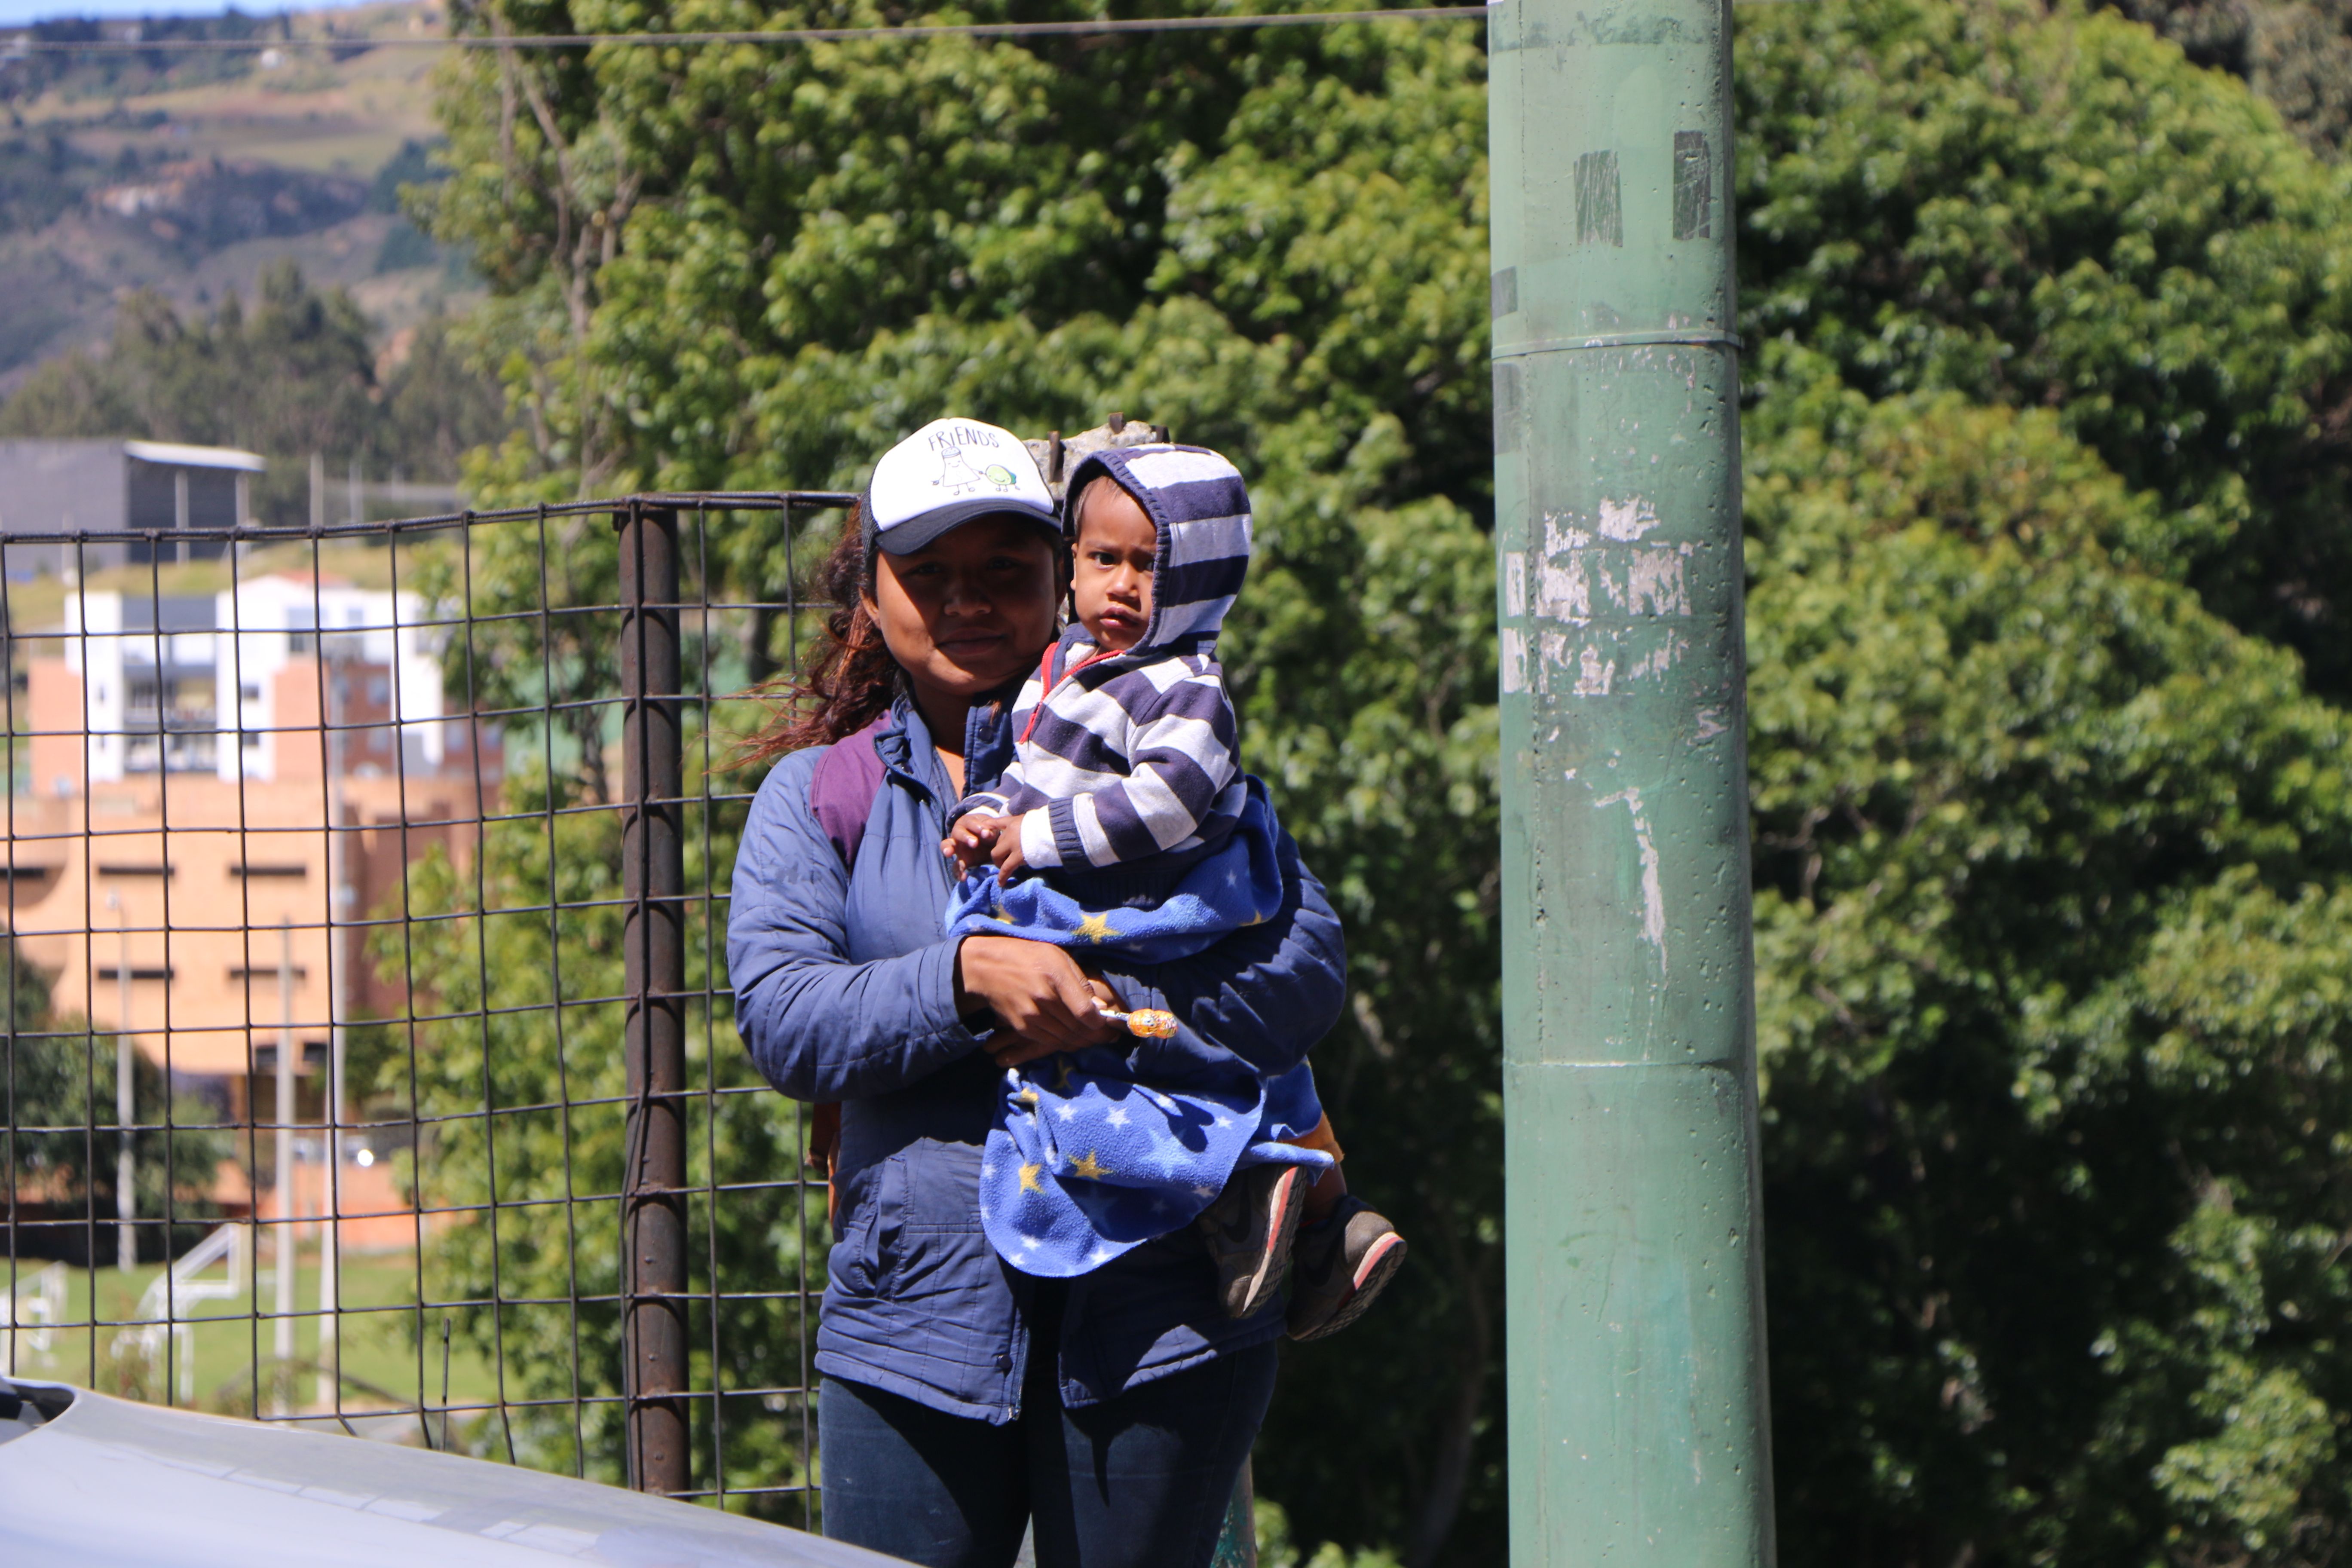 A Venezuelan woman and her child ask for money from passing motorists. Image by Patrick Ammerman. Colombia, 2019.